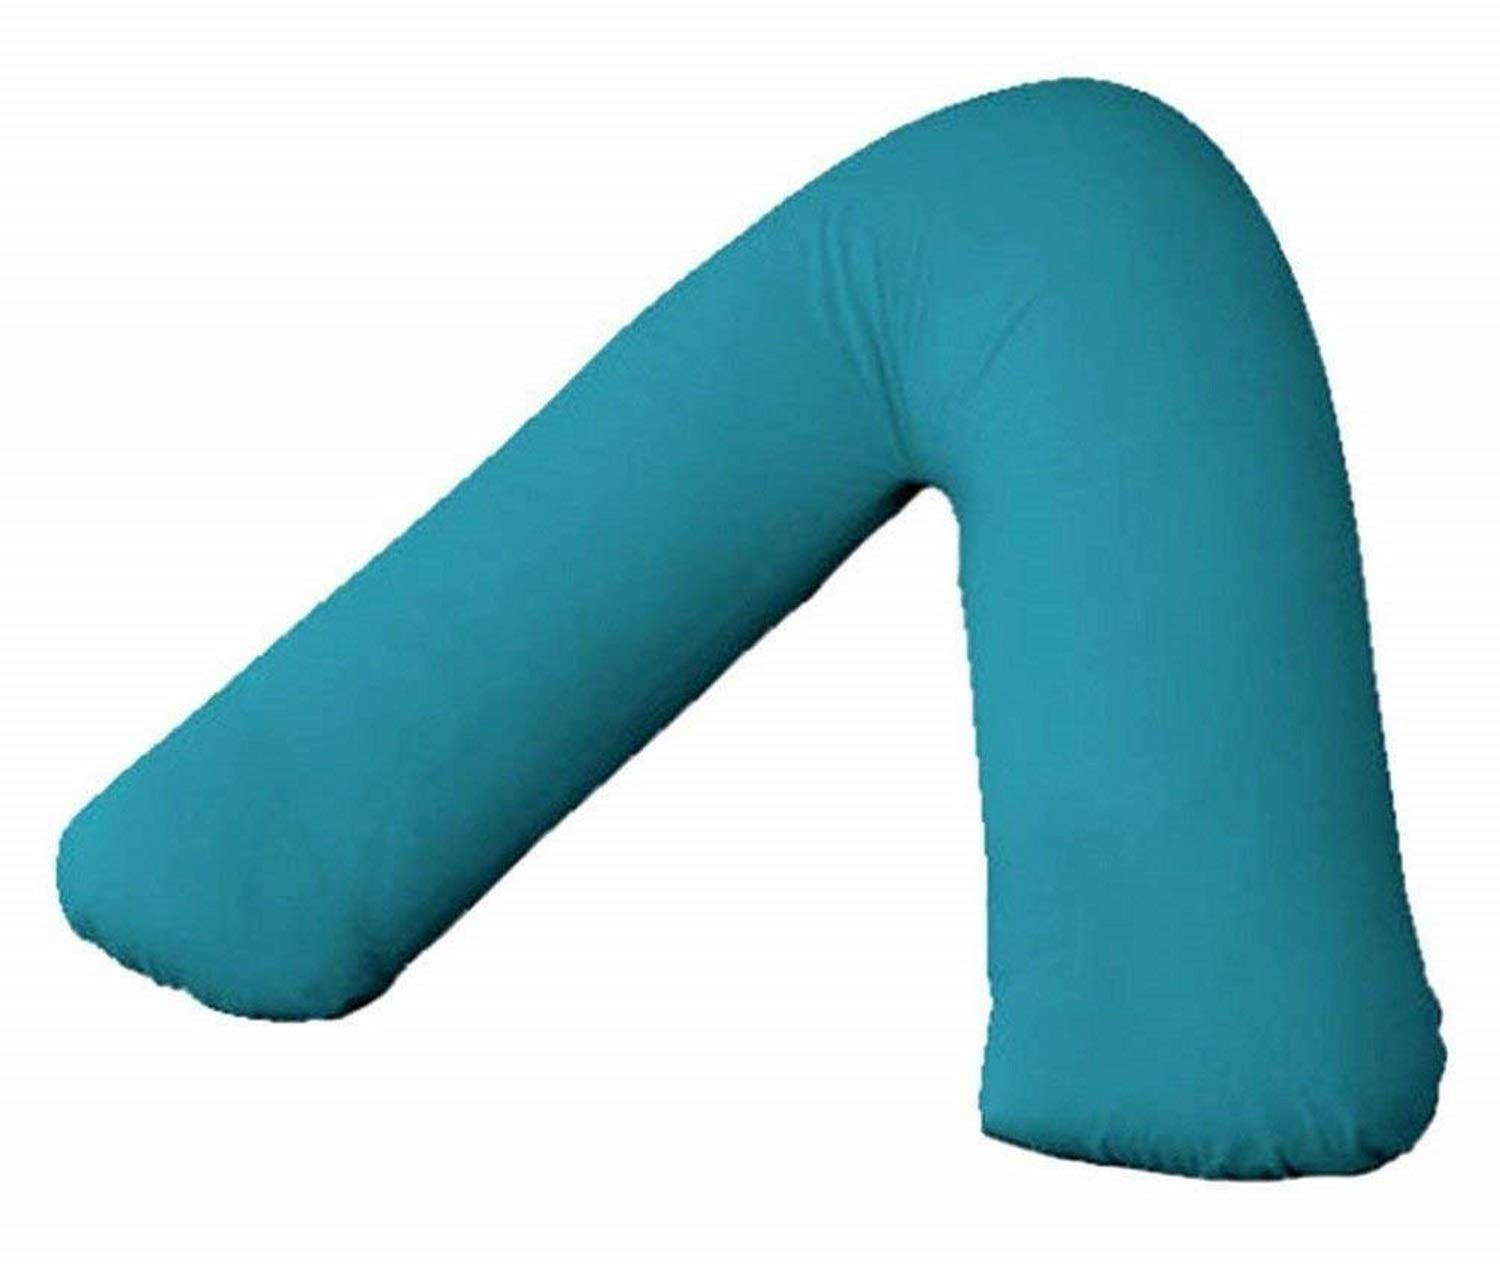 Comfy Nights Plain Dyed Polycotton V-Shaped Pillow Cases/Covers (Teal)